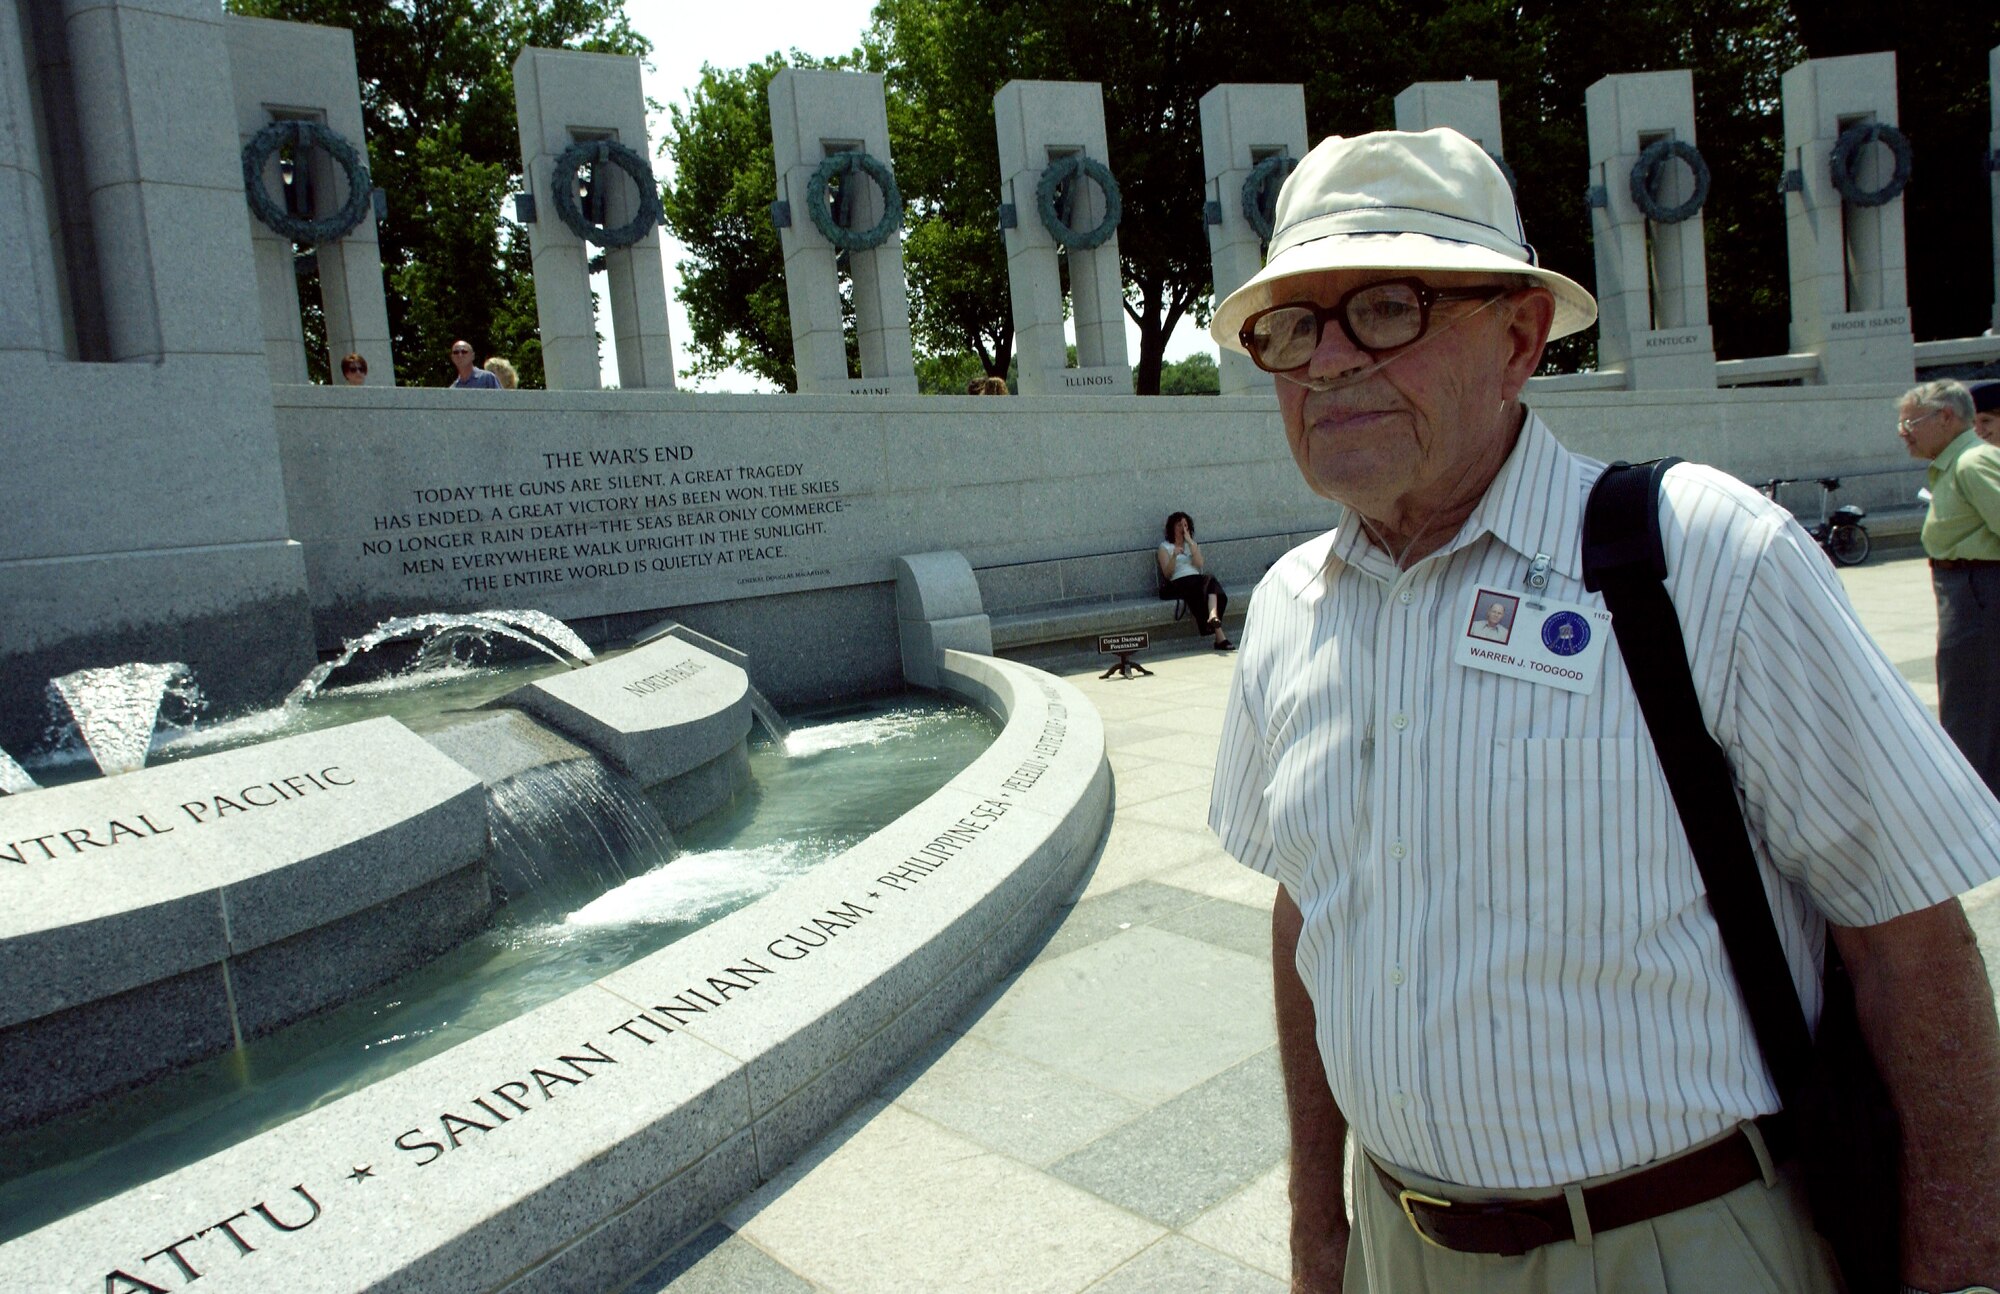 WASHINGTON -- Retired Chief Master Sgt. Warren J. Toogood, visited the World War II Memorial here May 11.  Chief Toogood was a supply specialist in the Pacific during World War II, and he retired from the Air Force after a 24-year career.  The memorial is nestled between the Lincoln Memorial and Washington Monument on the National Mall.  It will be officially dedicated Memorial Day weekend.  (U.S. Air Force photo by Master Sgt. Jim Varhegyi) 